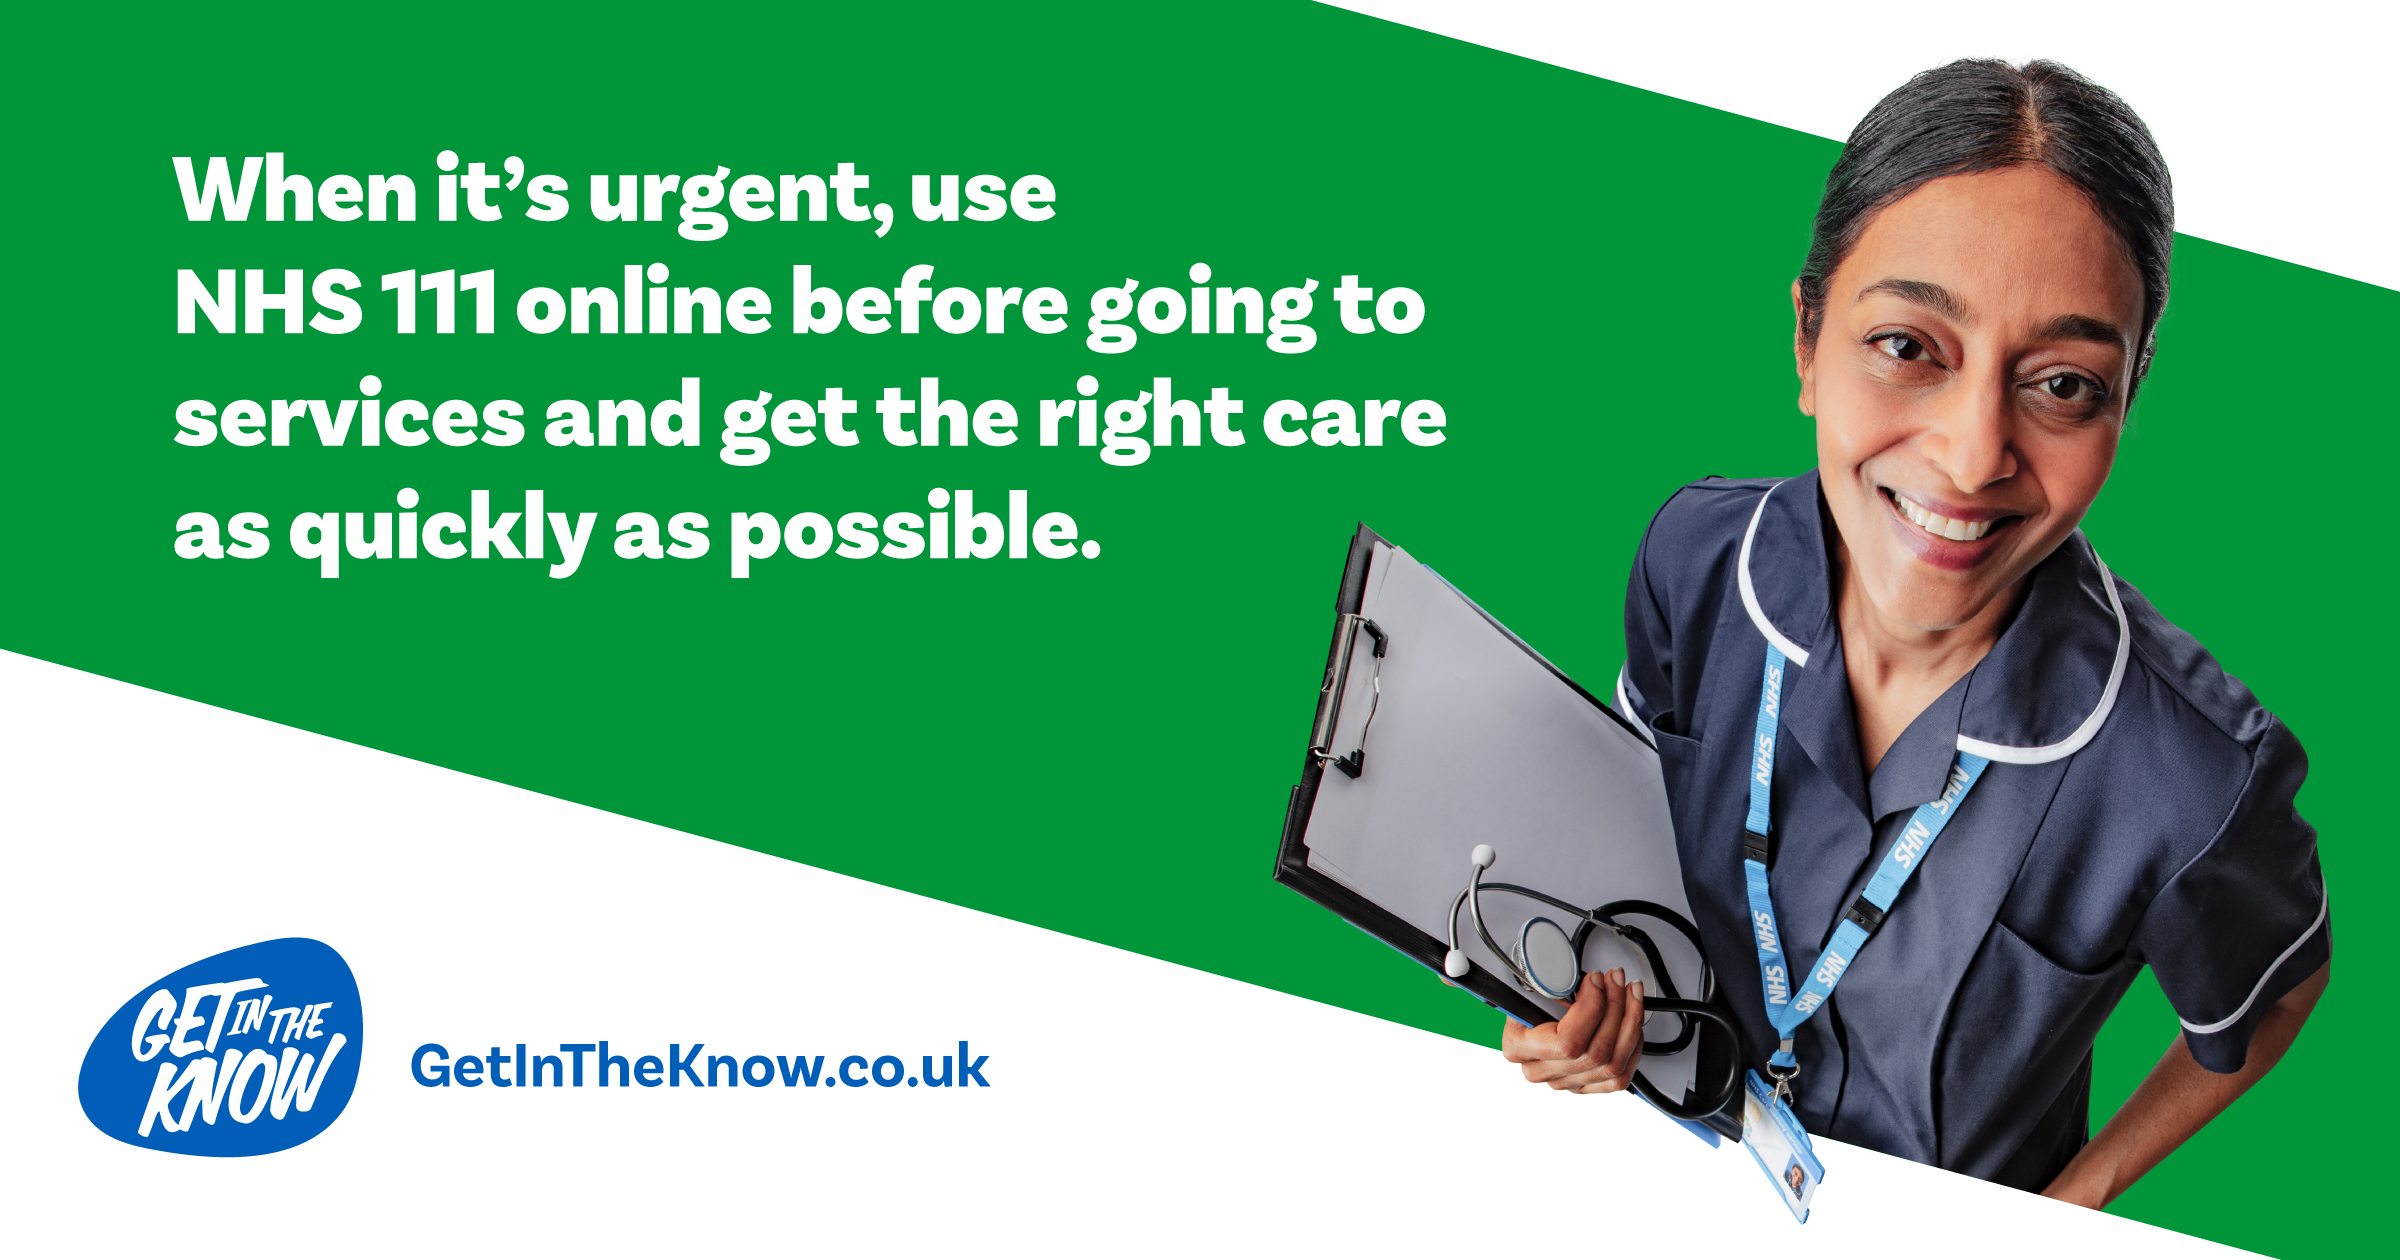 Image of a GP practice nurse holding a clip board. Alongside this text reads: When it's urgent, use NHS 111 online before going to services and get the right care as quickly as possible. Image also contains the Get in the Know logo and www.getintheknow.co.uk